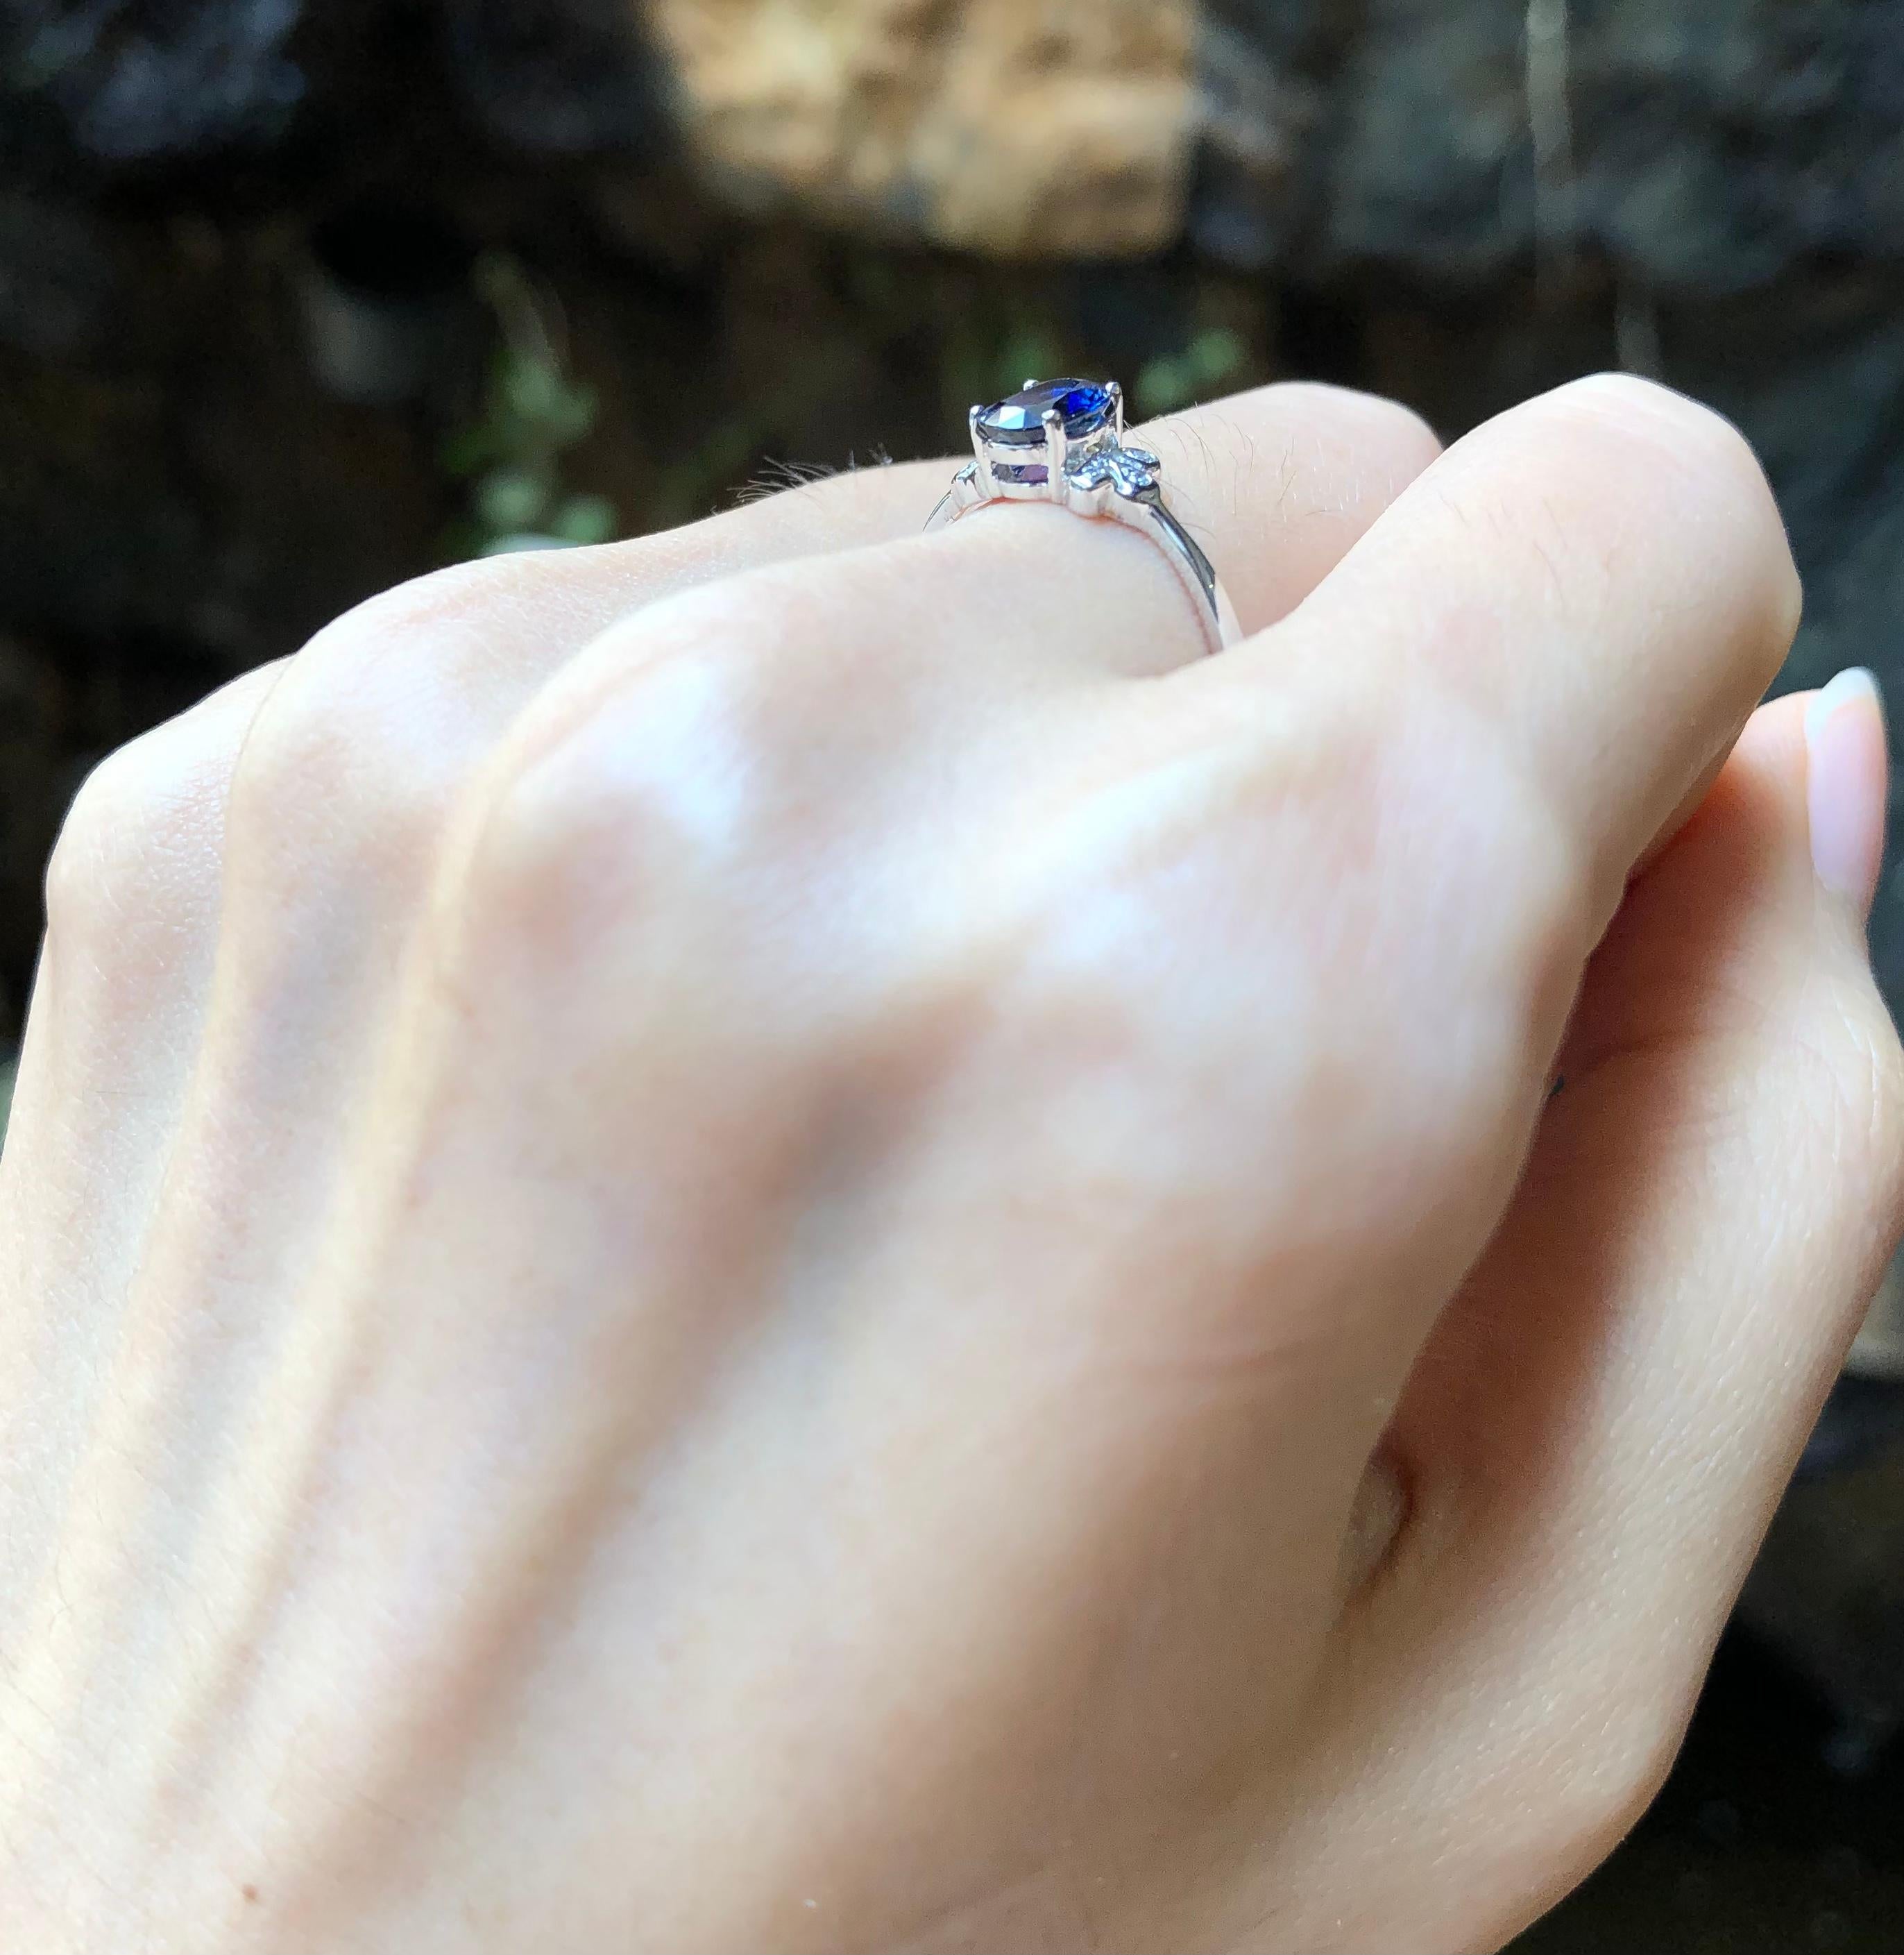 Blue Sapphire 0.82 carat with Diamond 0.03 carat Ring set in 18 Karat White Gold Settings

Width:  0.5 cm 
Length: 0.7 cm
Ring Size: 54
Total Weight: 2.3 grams

